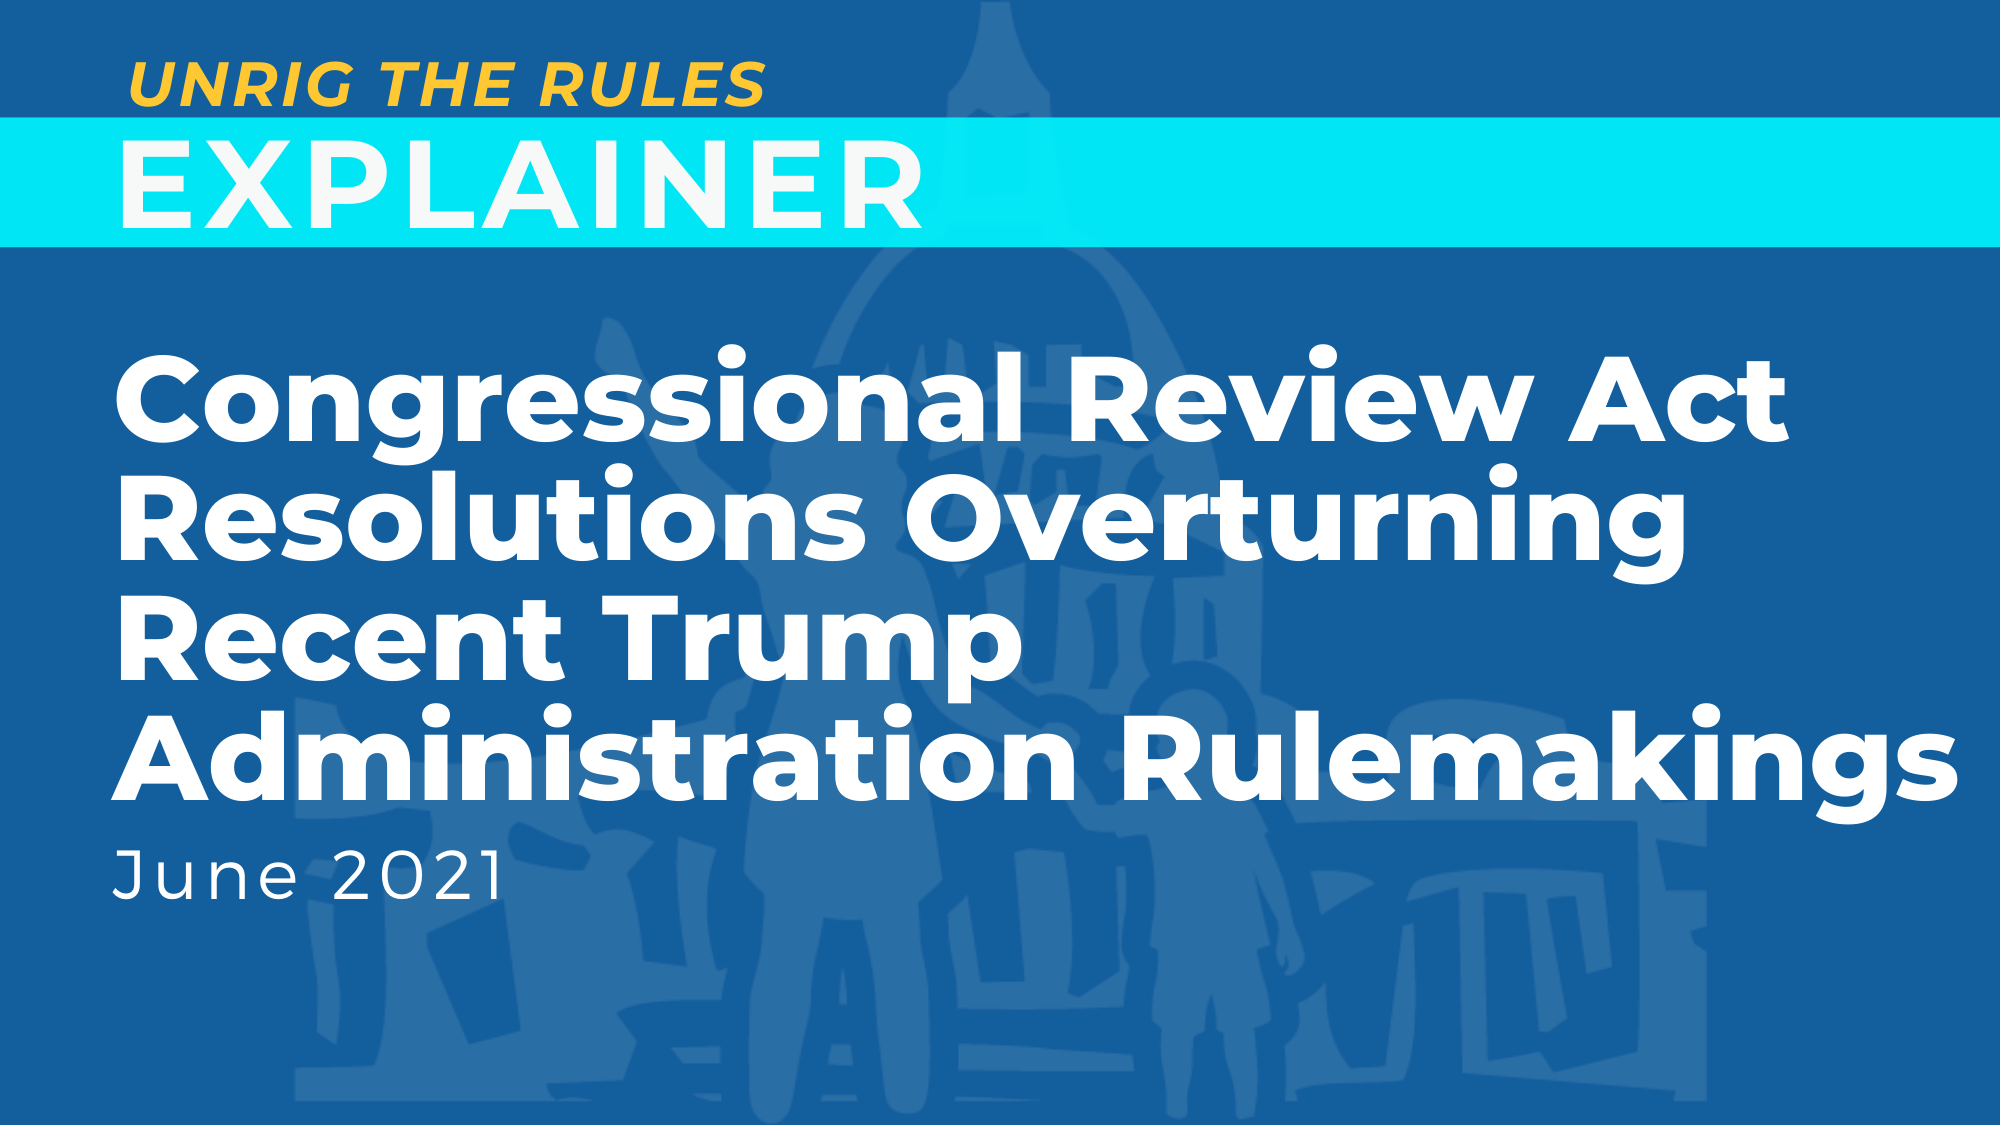 Congressional Review Act Resolutions Overturning Recent Trump Administration Rulemakings